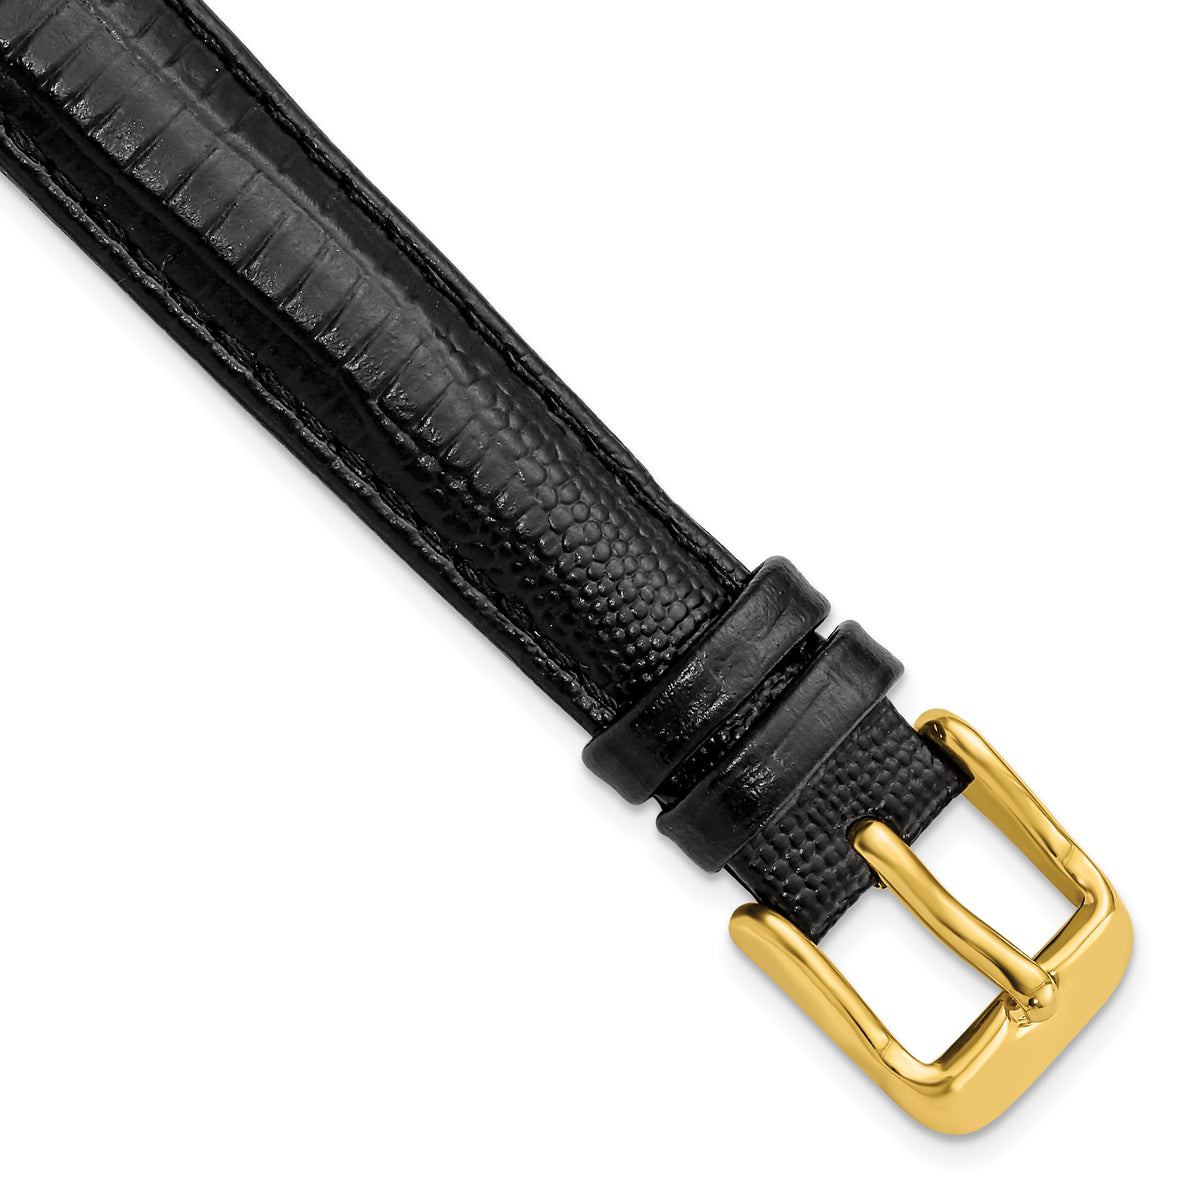 DeBeer 14mm Black Teju Liz Grain Leather with Gold-tone Buckle 6.75 inch Watch Band